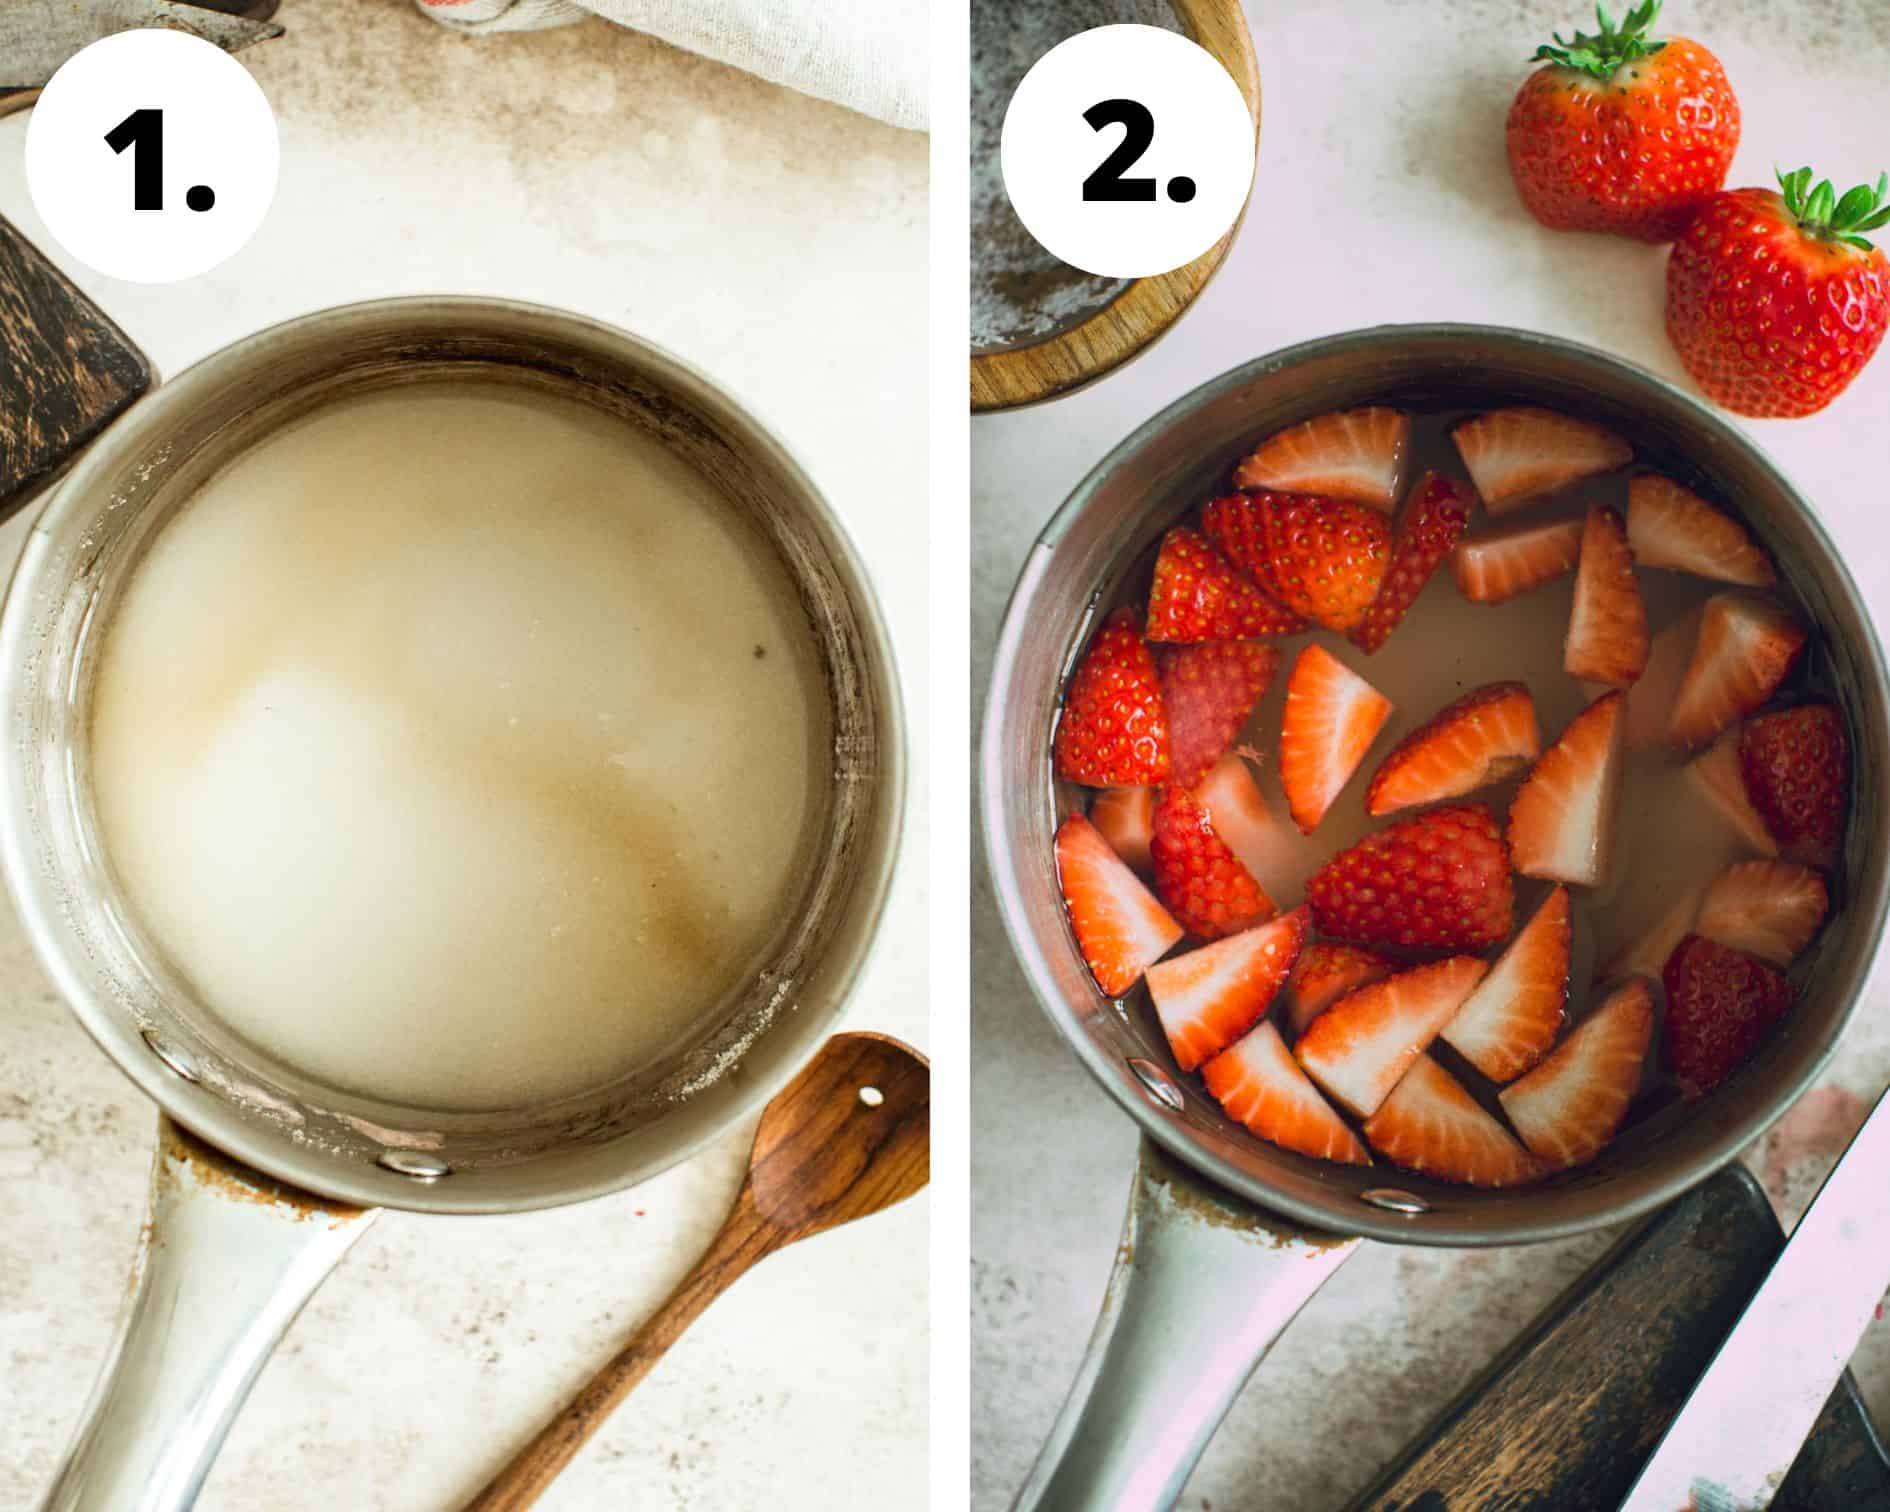 Process steps 1 and 2 for making strawberry syrup.